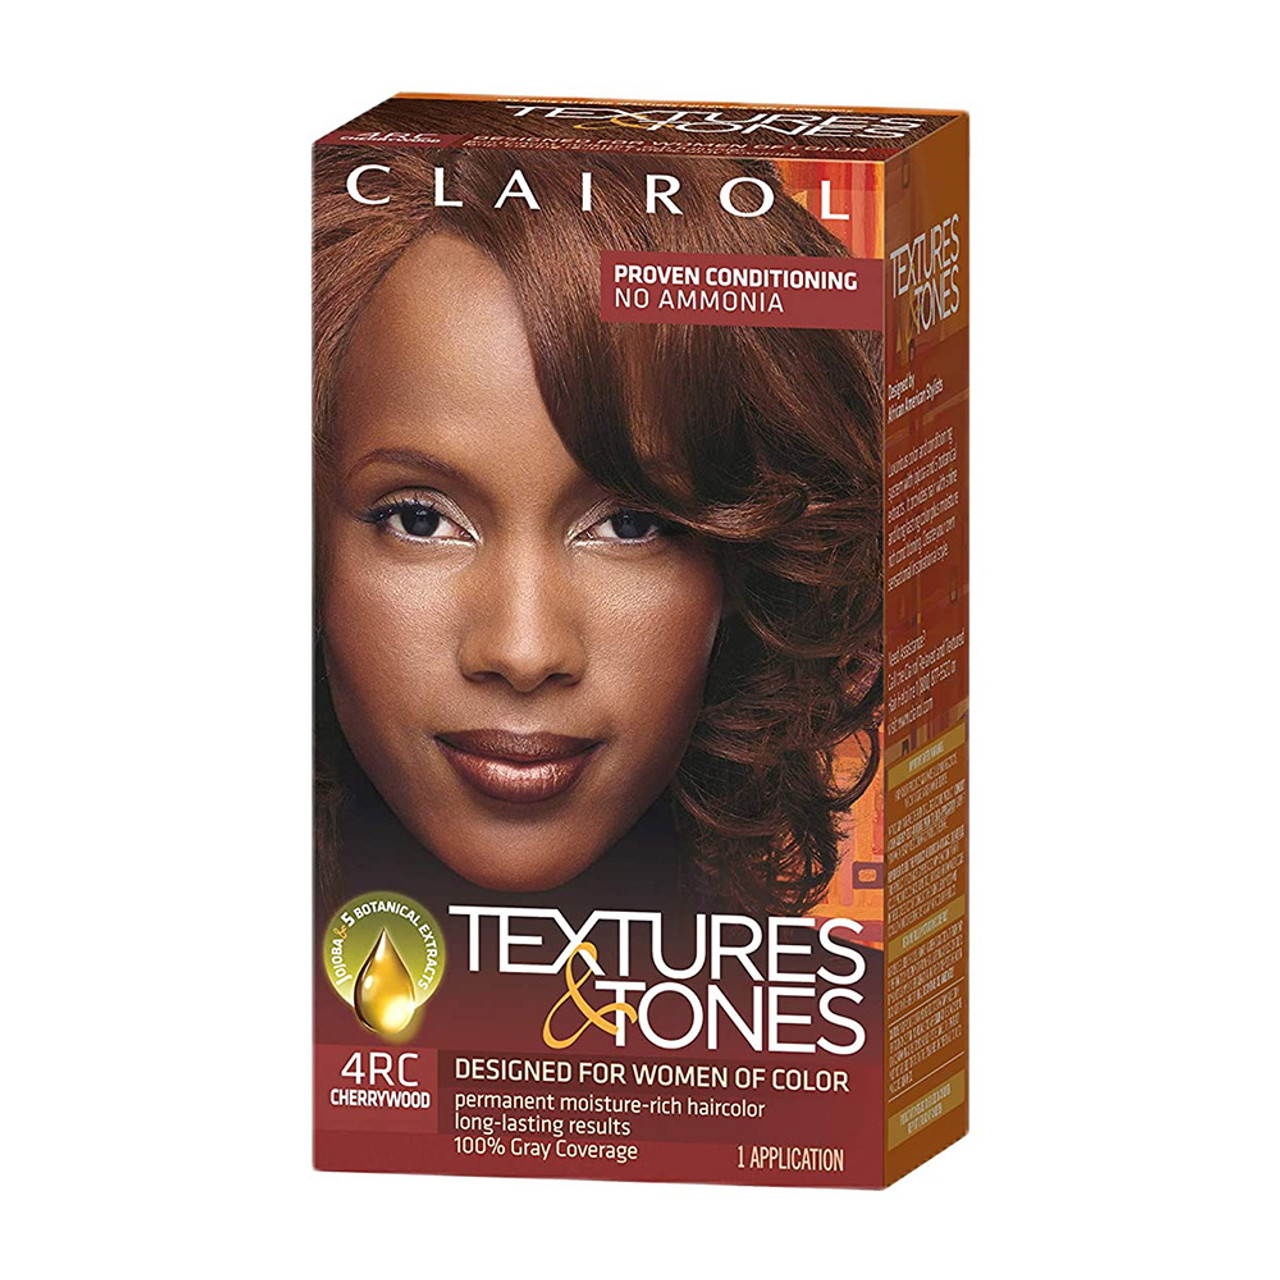 Clairol Professional Textures And Tones Permanent Moisture Hair Color 4rc Cherrywood Kit 1 Ea